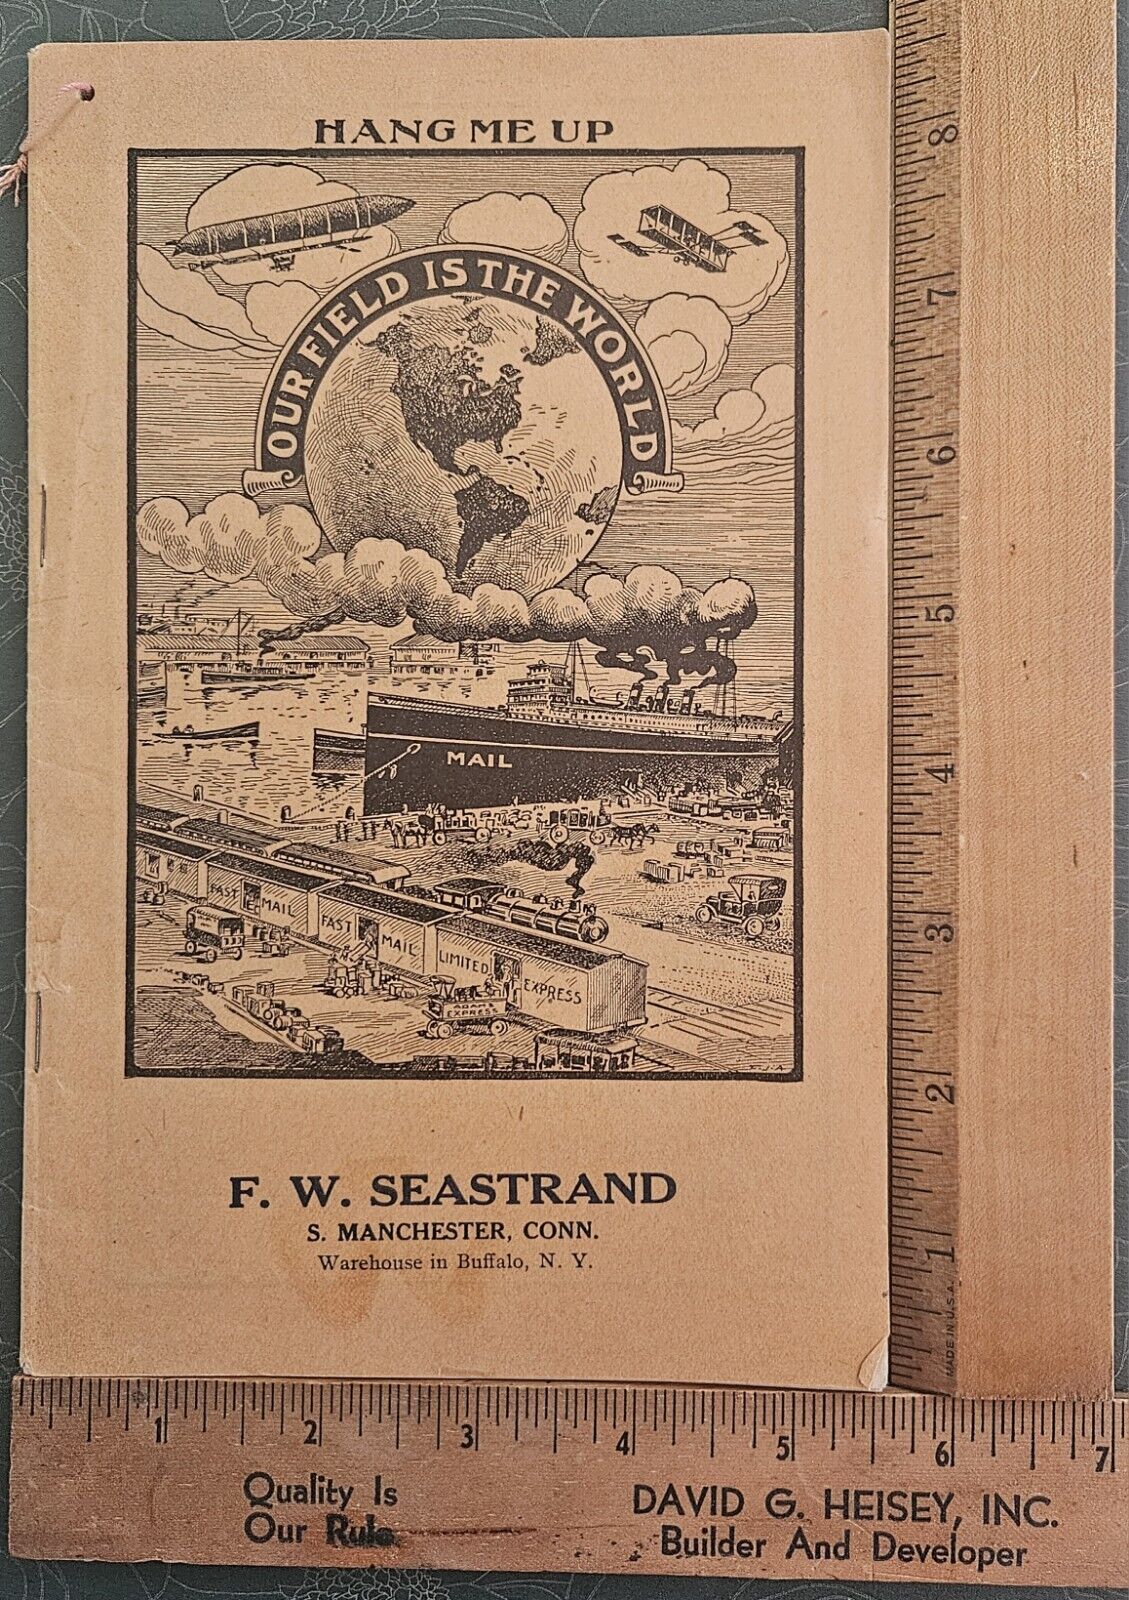 Vintage 1920 Zeppelin Airship Aviation Our Field Is The World Kitchen Catalog